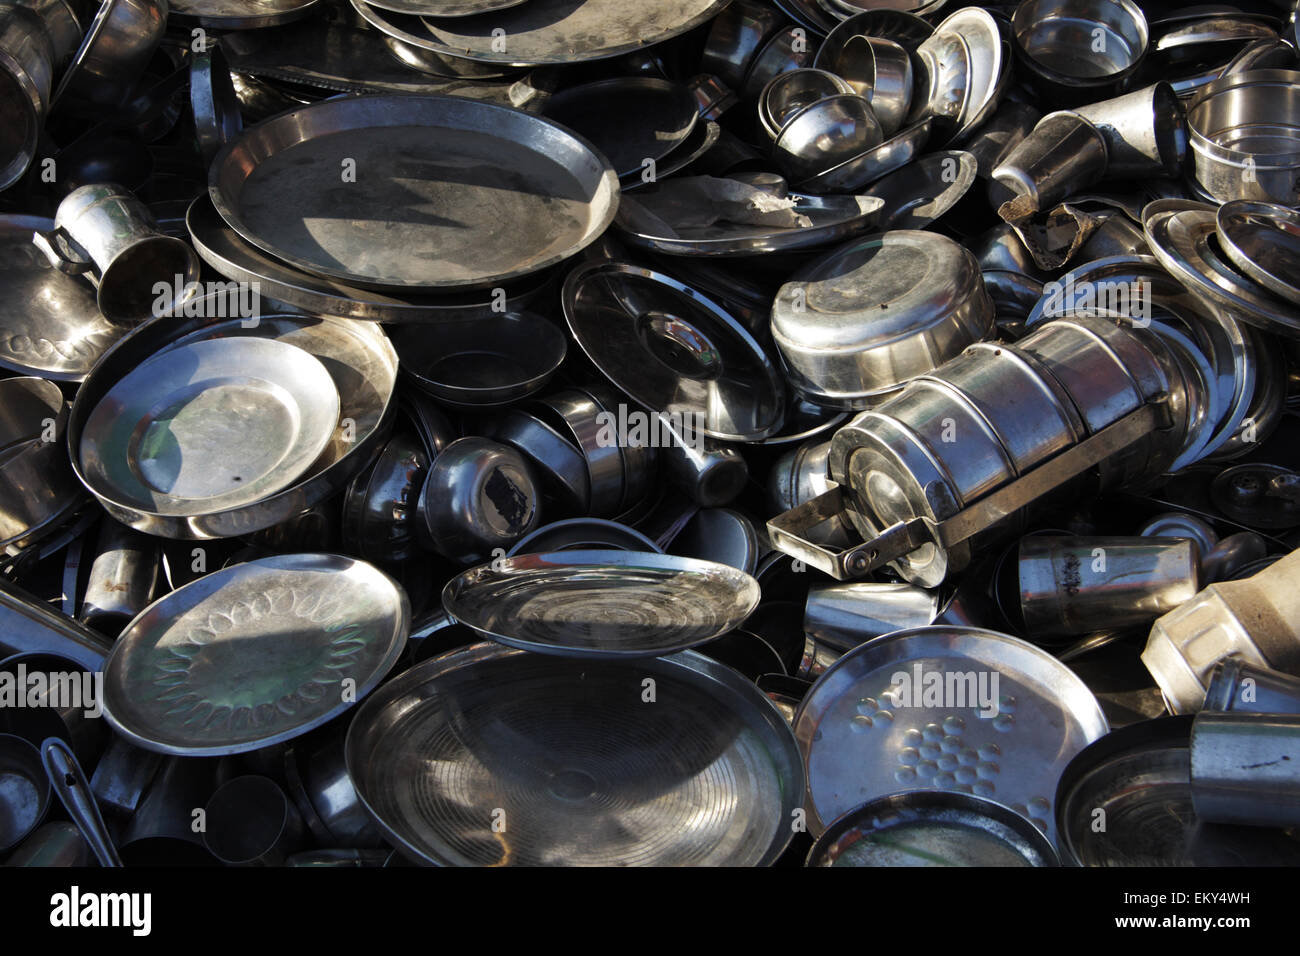 Metal kitchenware sold in an indian market Stock Photo